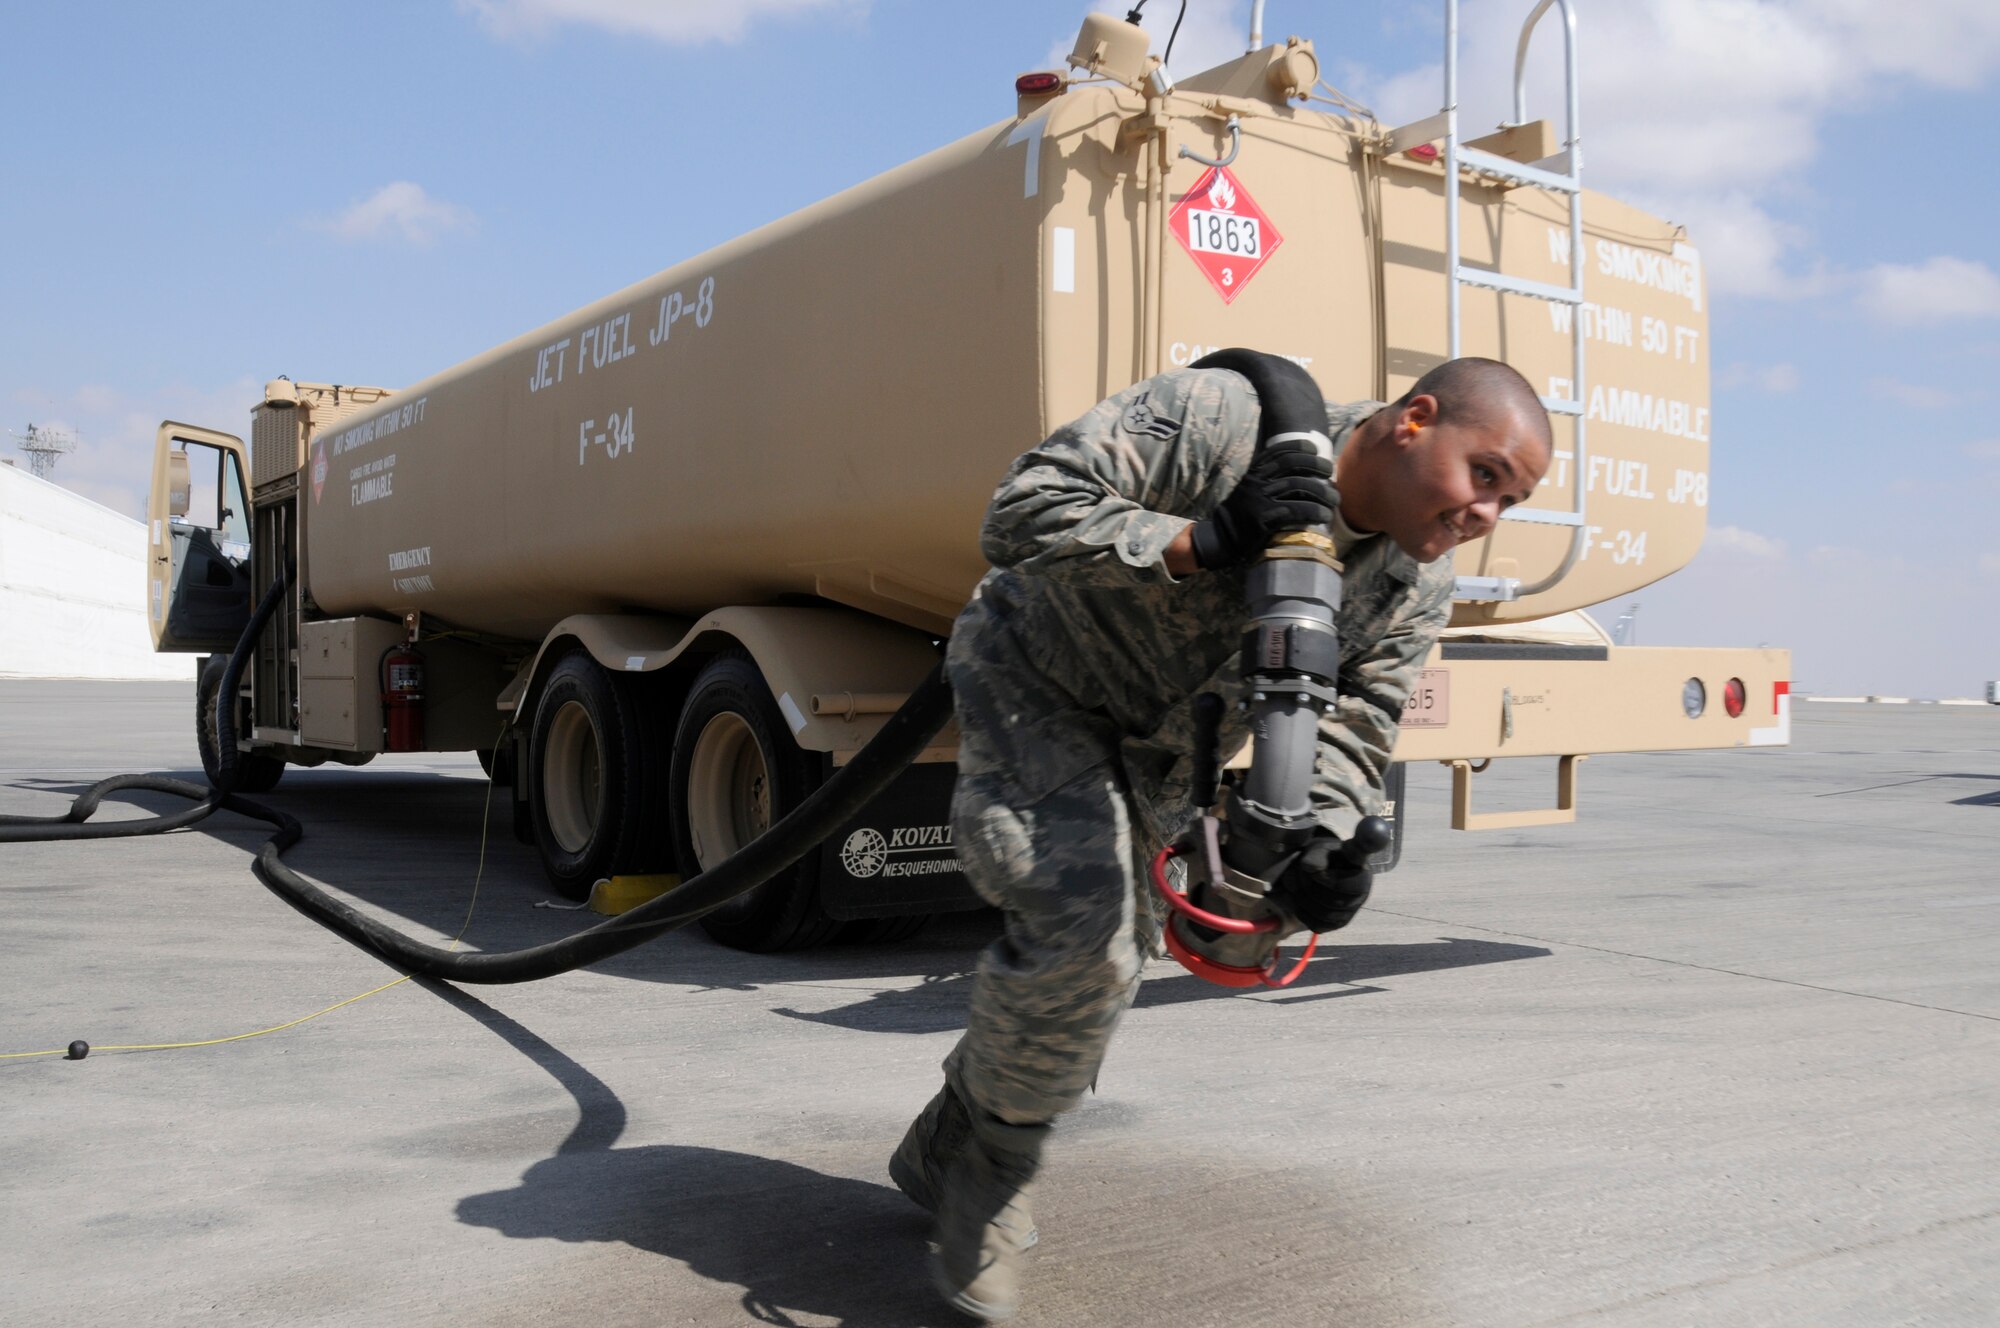 SOUTHWEST ASIA -- Airman 1st Class Eric Castro, 380th Expeditionary Logistics Readiness Squadron fuels operator pulls the hose out to refuel an E-3 Sentry, Jan 21. The 380th is the second largest refueling wing in the Air Force distributing an average of 520,000 gallons a day to aircraft throughout southwest Asia. Airman Castro is deployed from Eglin AFB, Fla. and is from Rochester, N.Y. (U.S. Air Force photo by Senior Airman Brian J. Ellis) (Released)